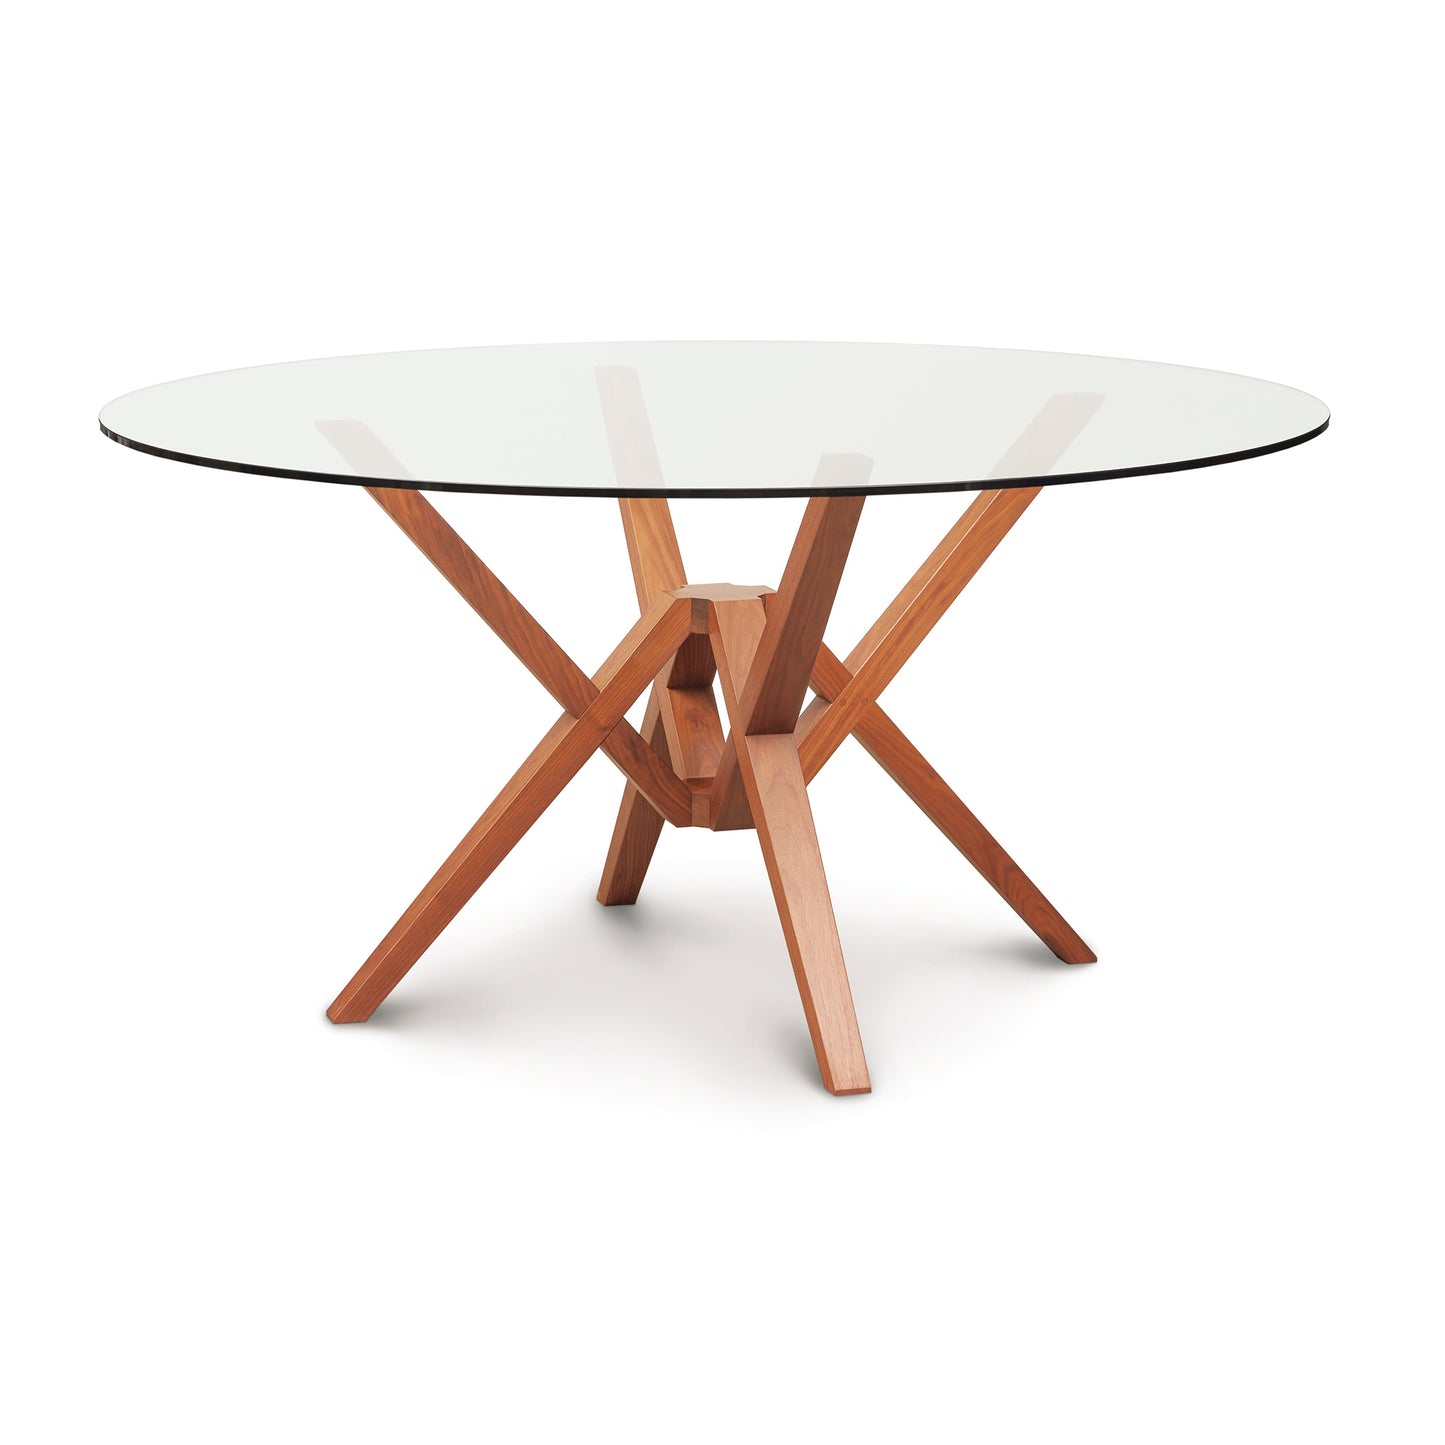 An Copeland Furniture Exeter Round Glass Top Table with a solid wood base featuring an intersecting support design crafted from sustainably harvested hardwoods.